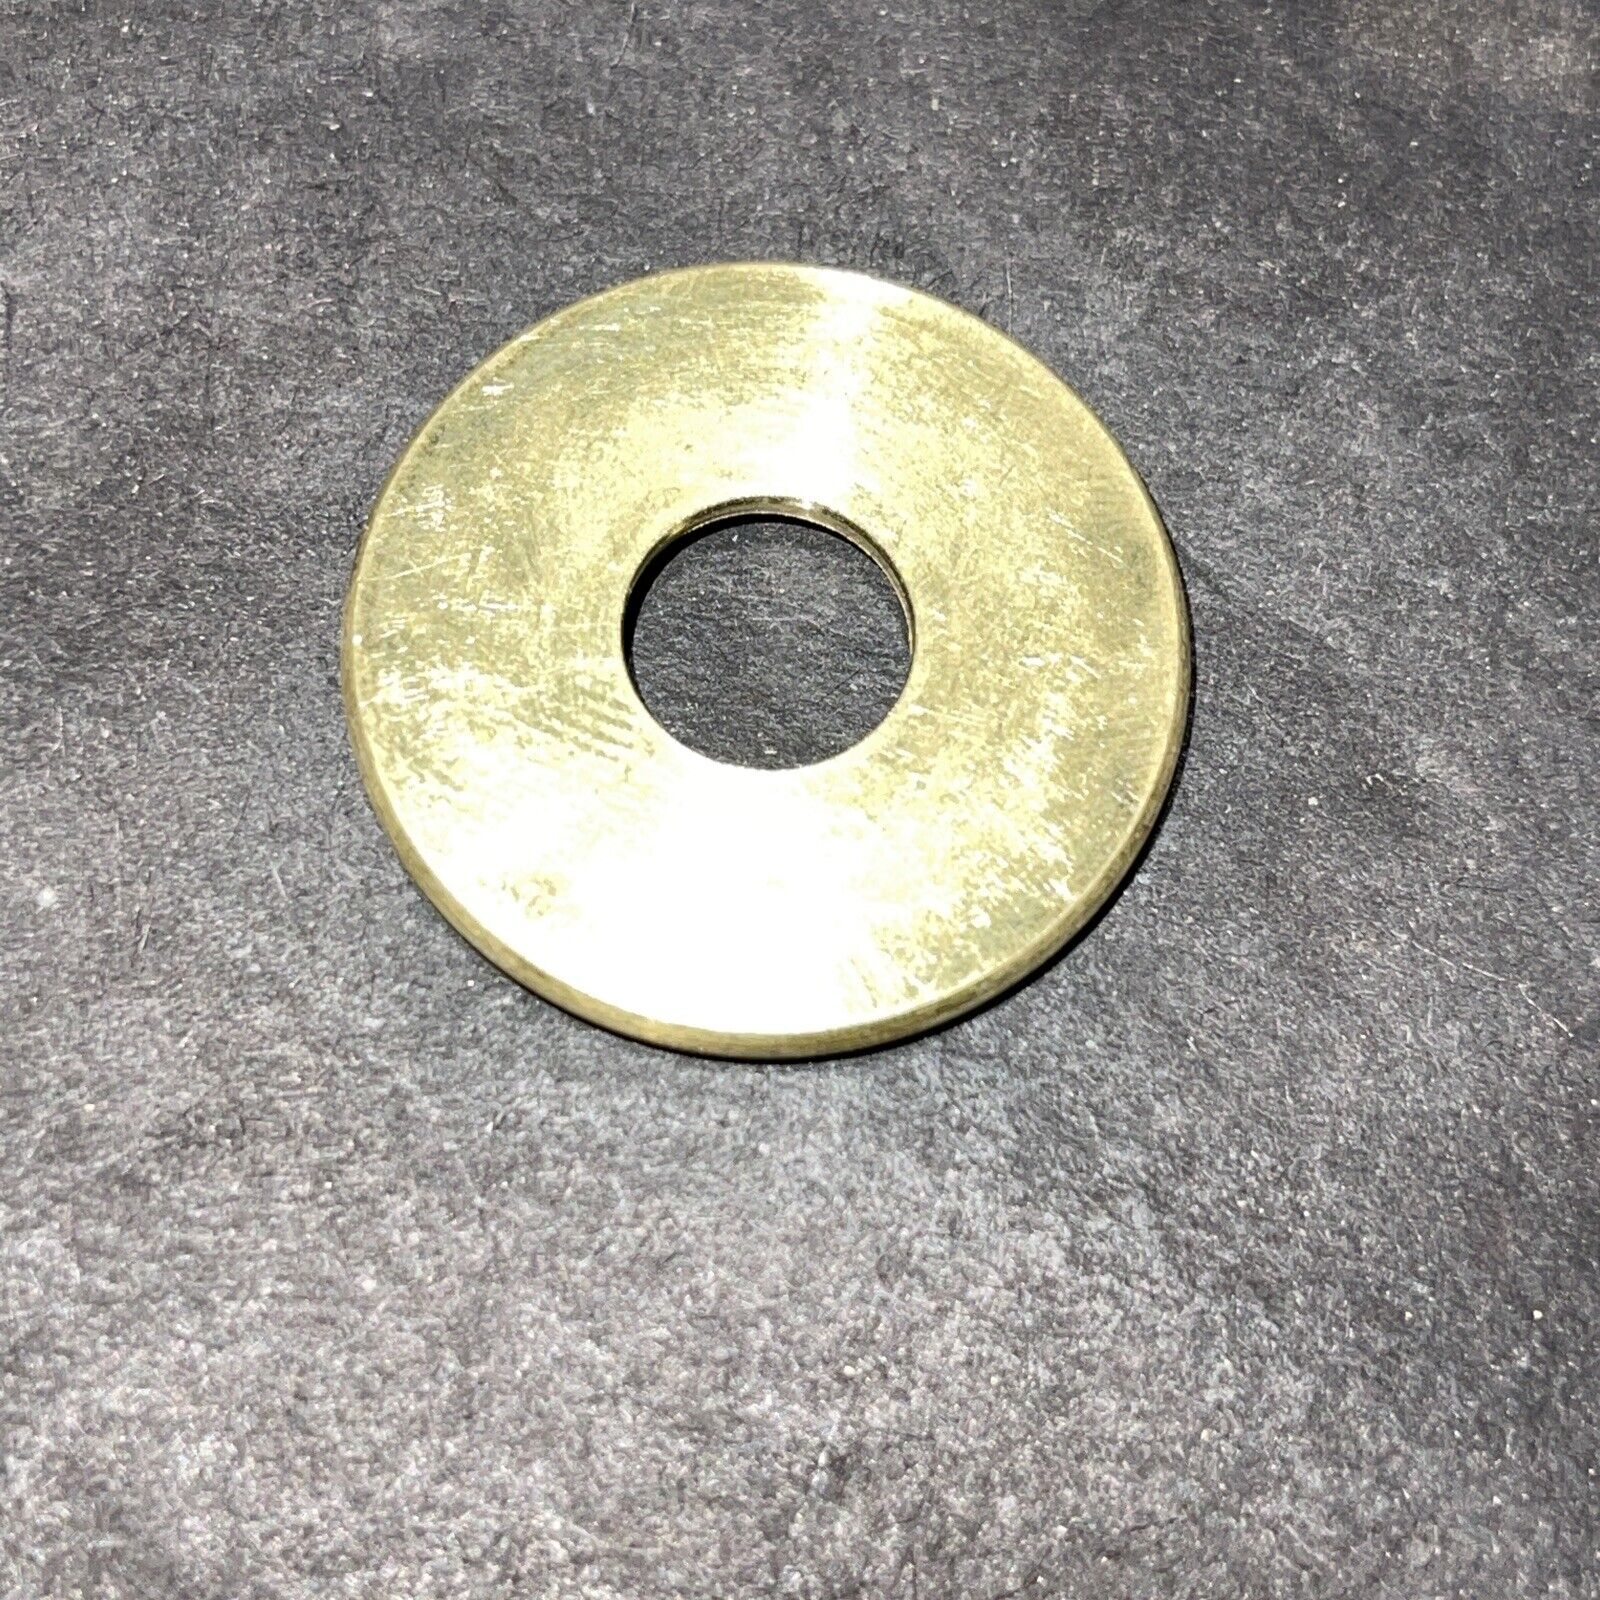 1-1/8” SOLID BRASS TURNED CHECK RINGS UNFINISHED 1/8IPS SLIP (3/8